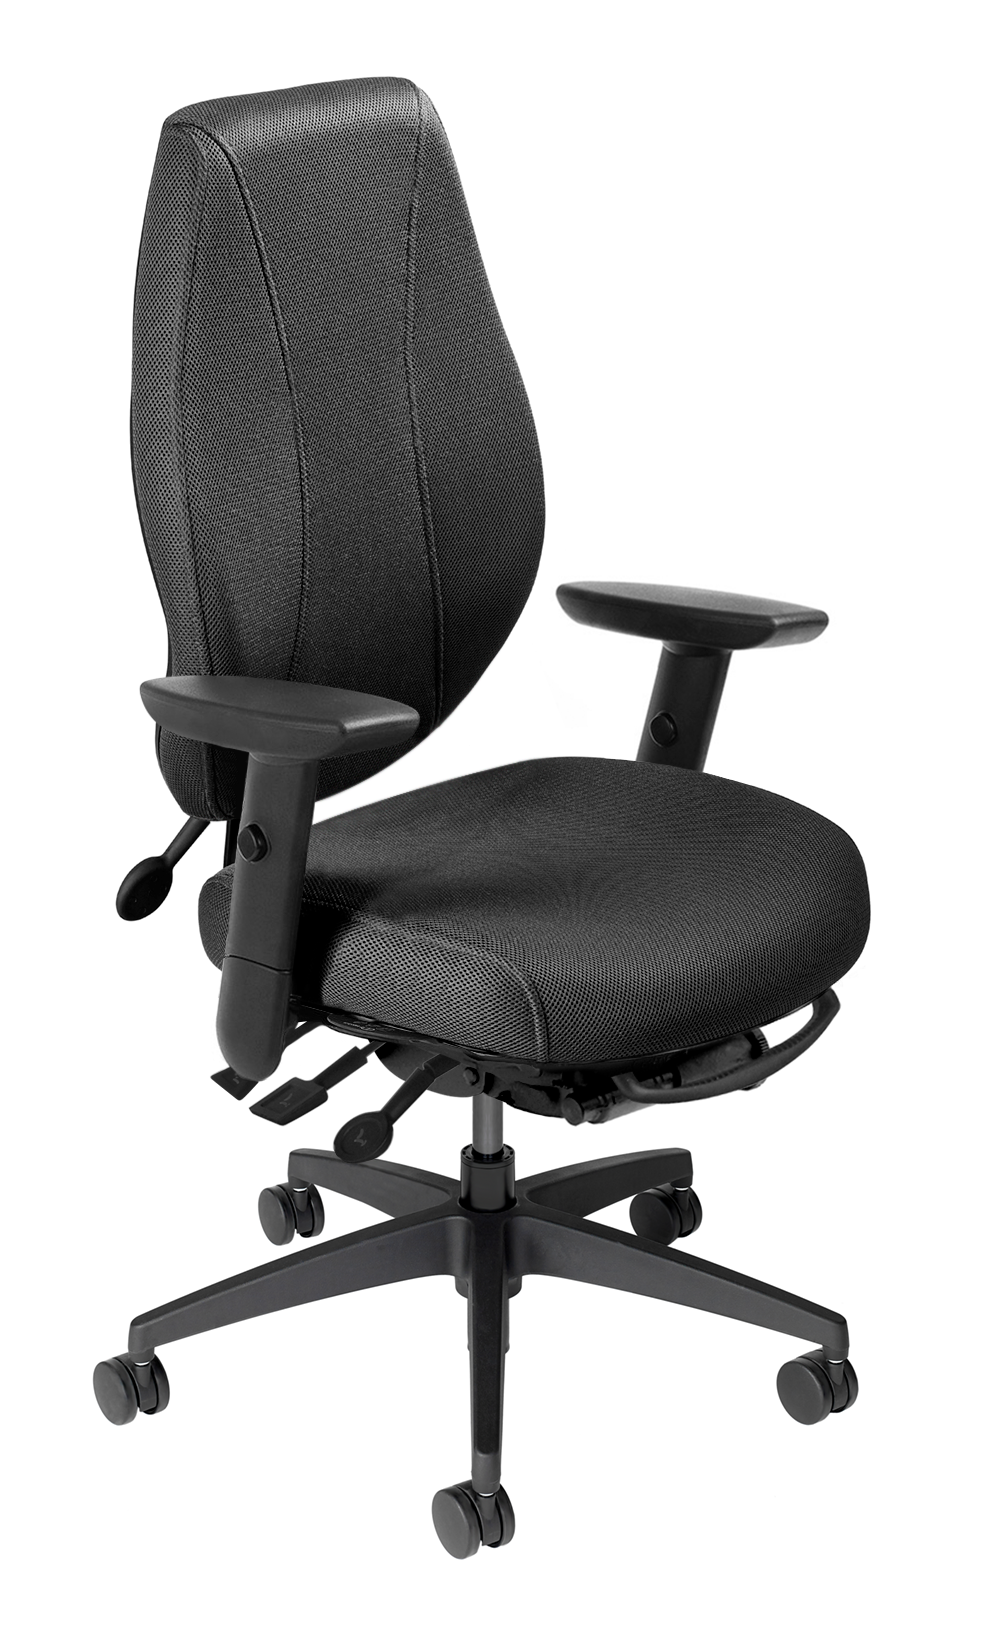 Second Hand Office Chairs For Sale In Kenya - abevegedeika